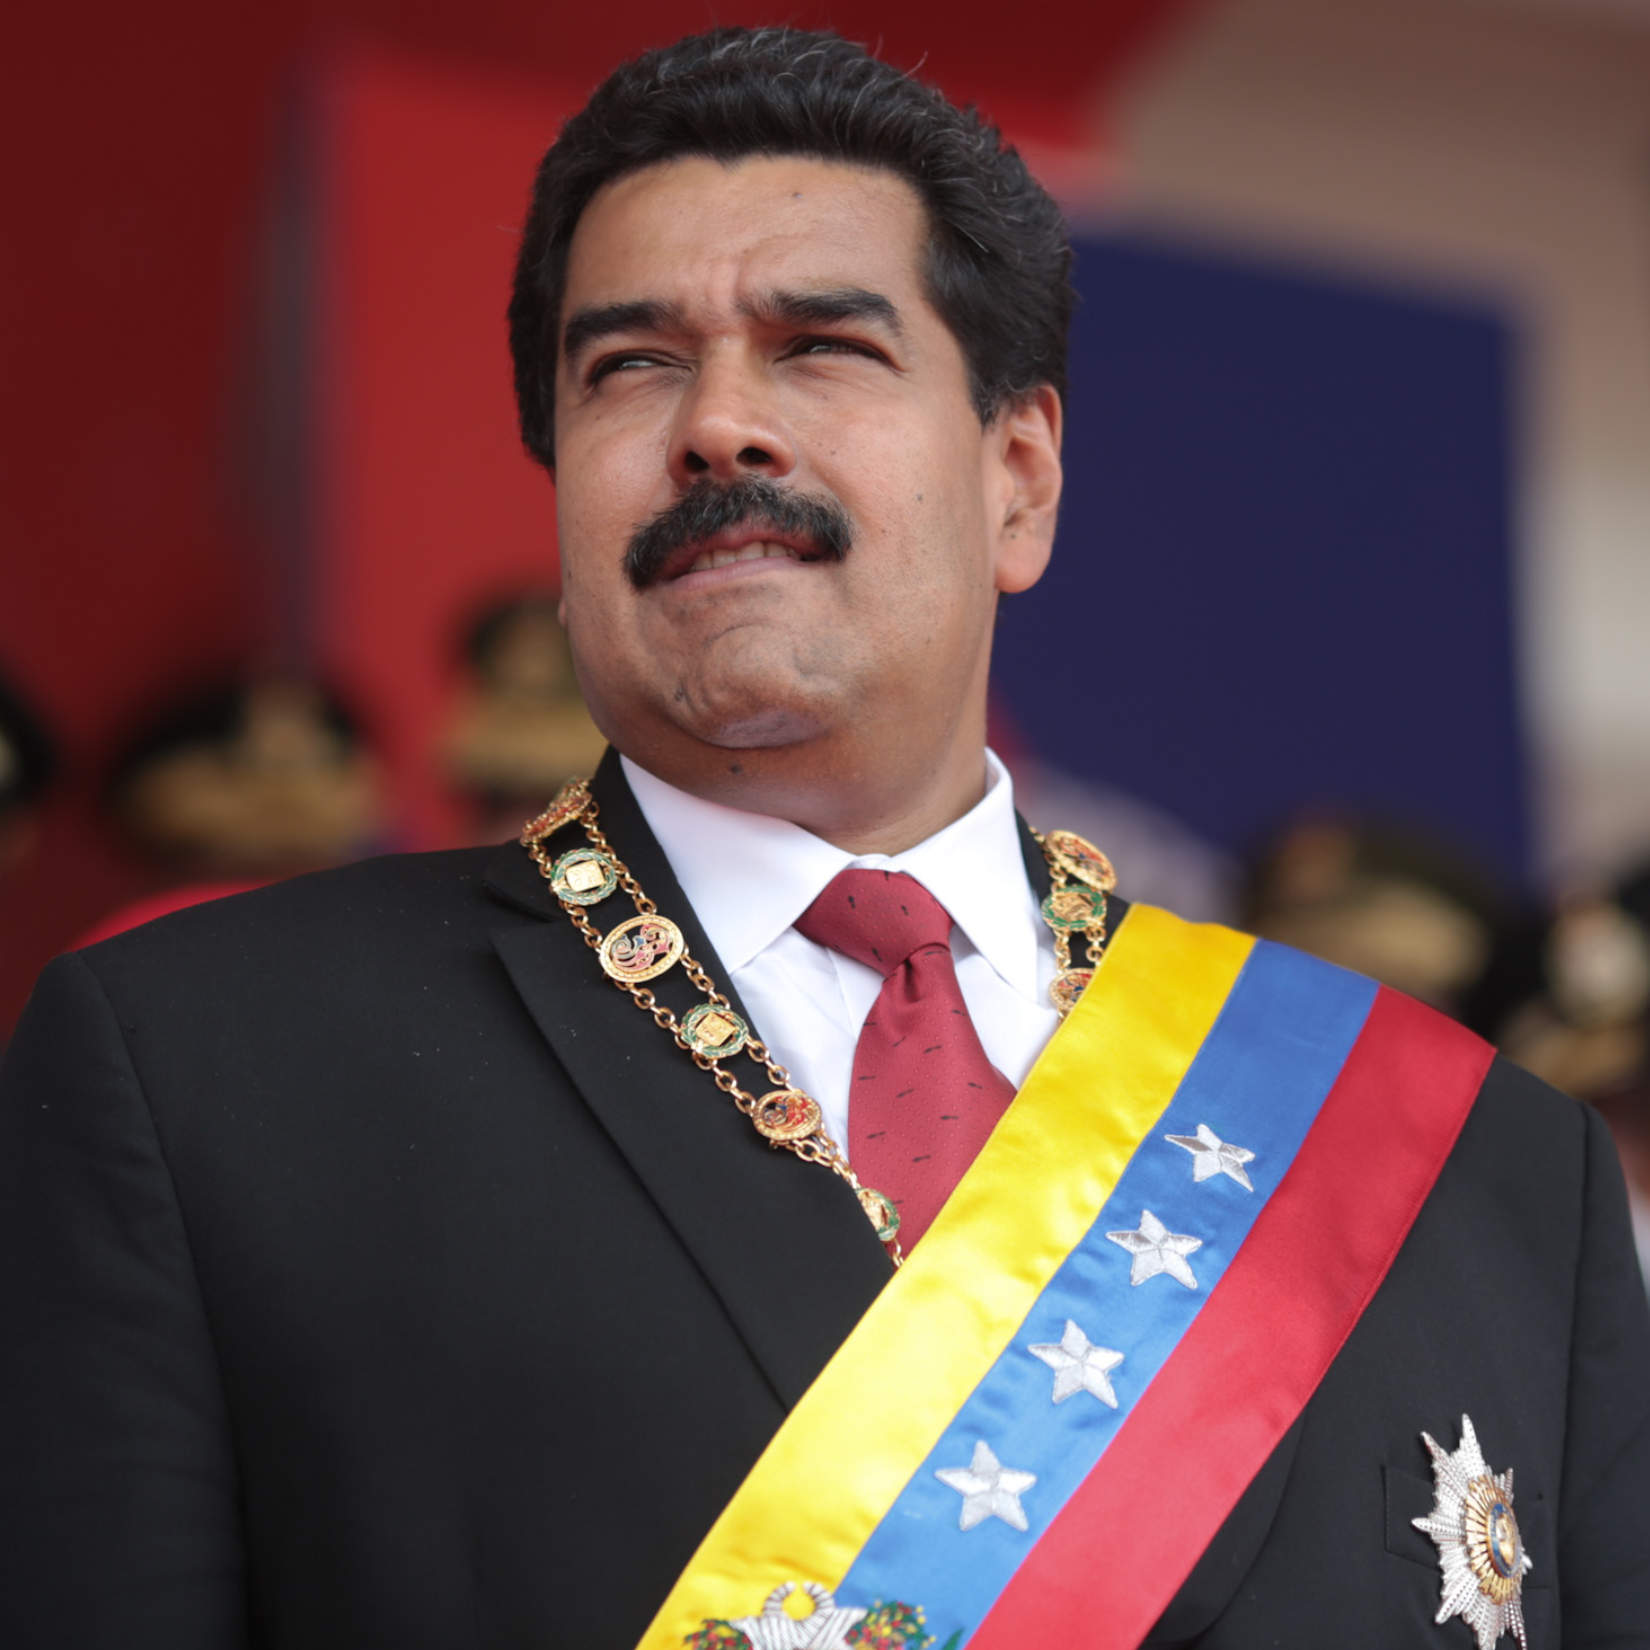 Venezuela Announces the Creation of Oil-Backed National Cryptocurrency – the Petro